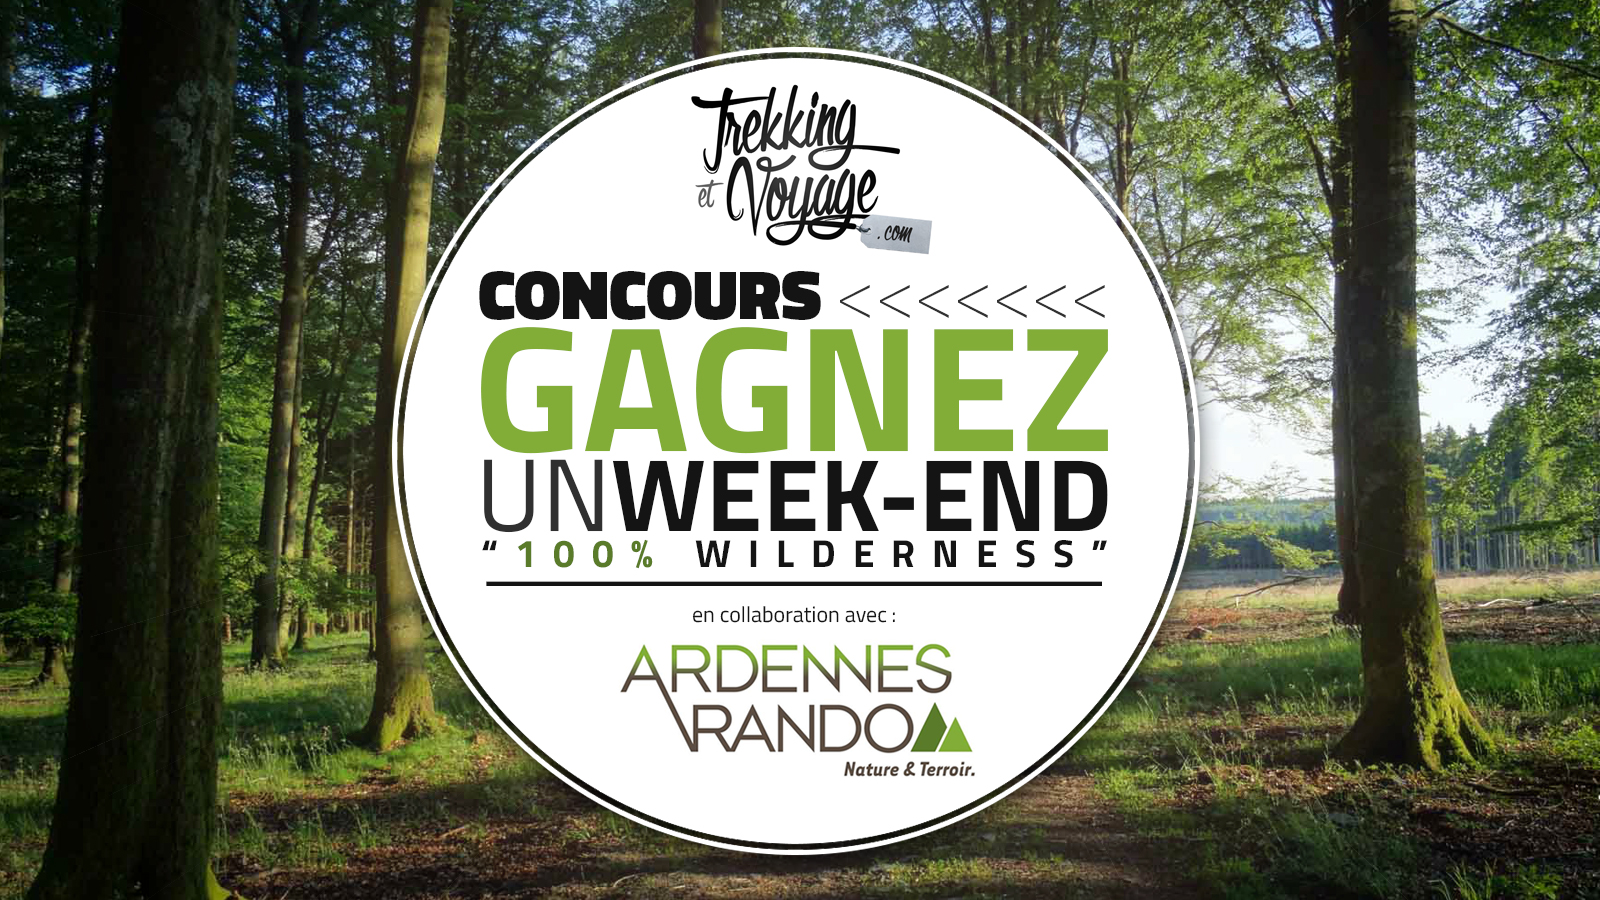 CONCOURS | 1 WEEK-END 100% WILDERNESS À GAGNER !